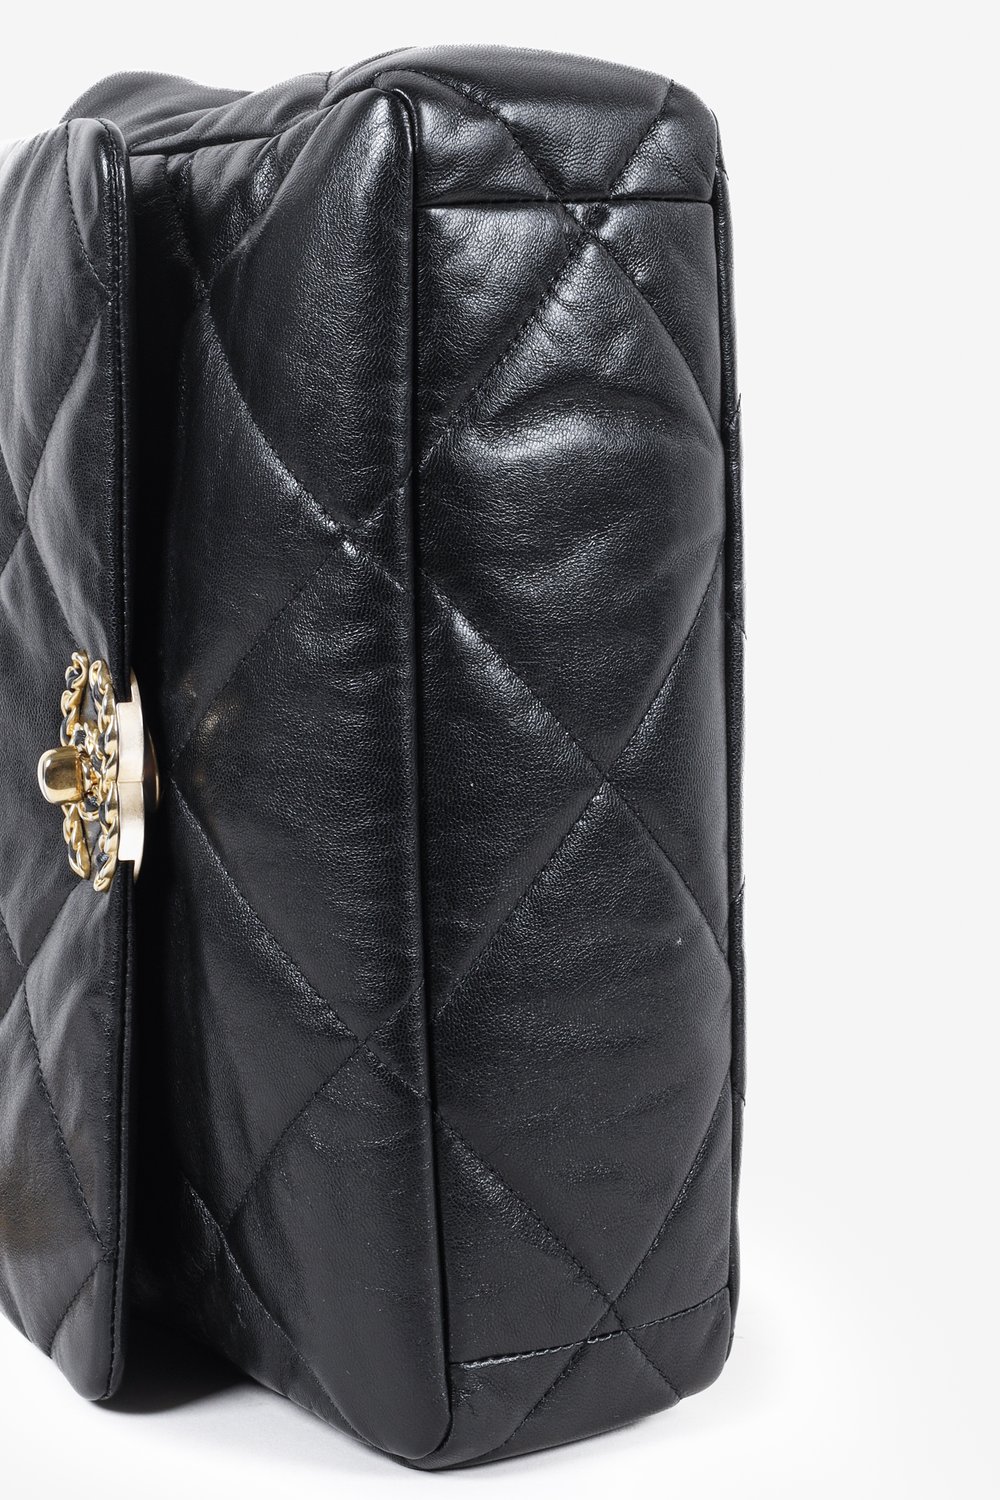 Chanel 19 Large Black Lambskin Quilted Handbag — BLOGGER ARMOIRE